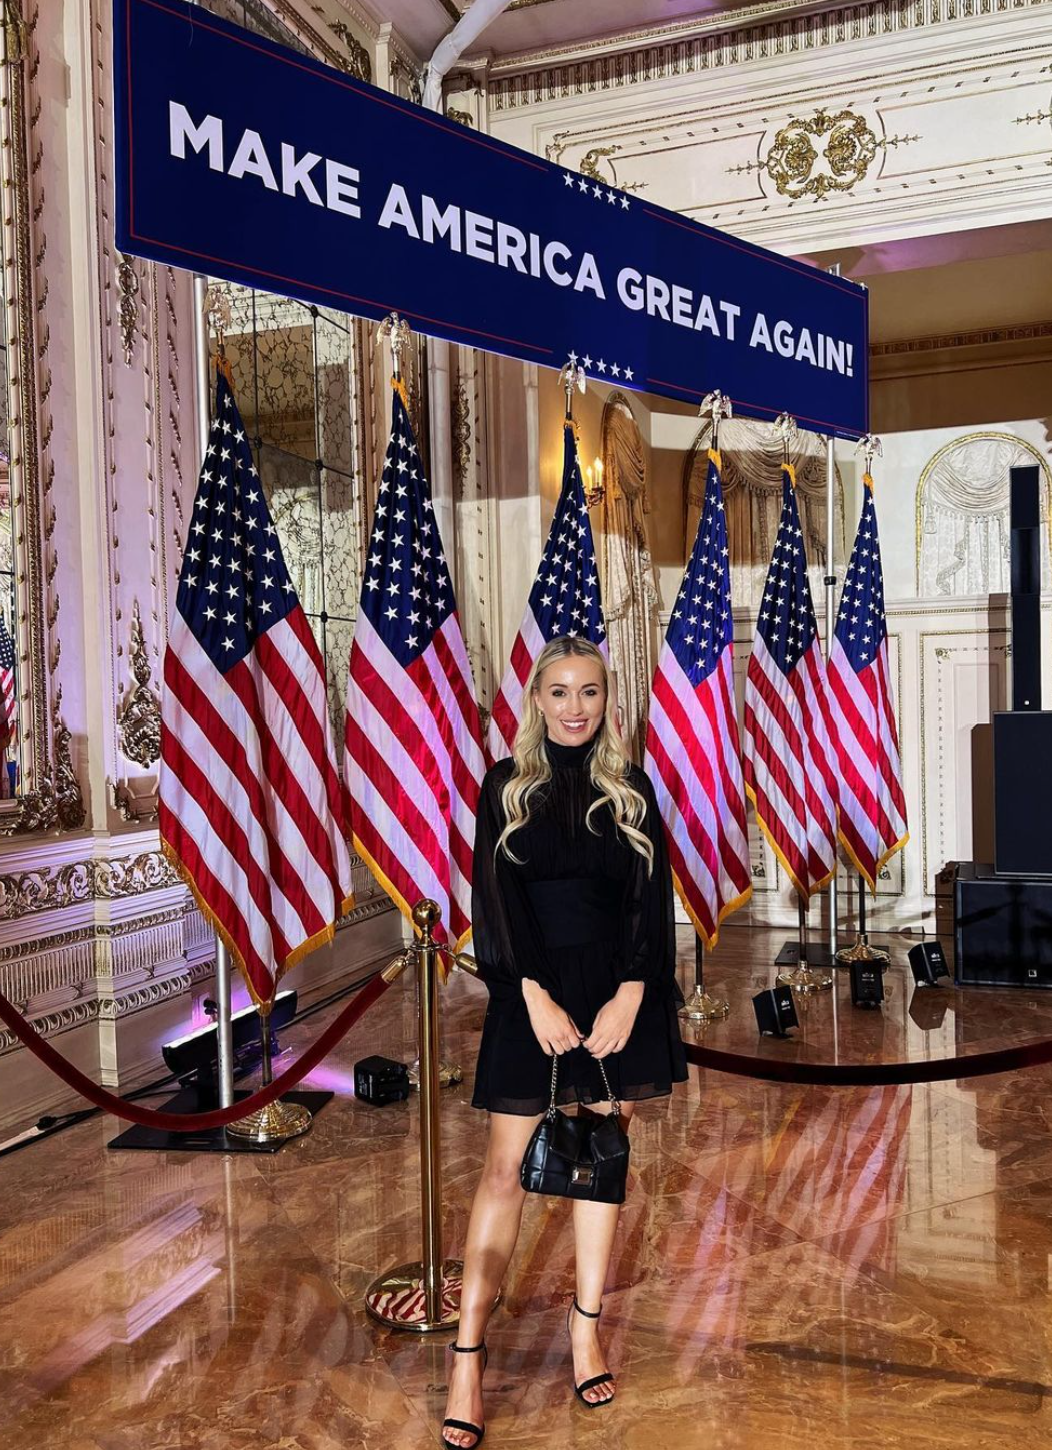 Ashton Munholland standing in front of American flags and Make America Great Again sign